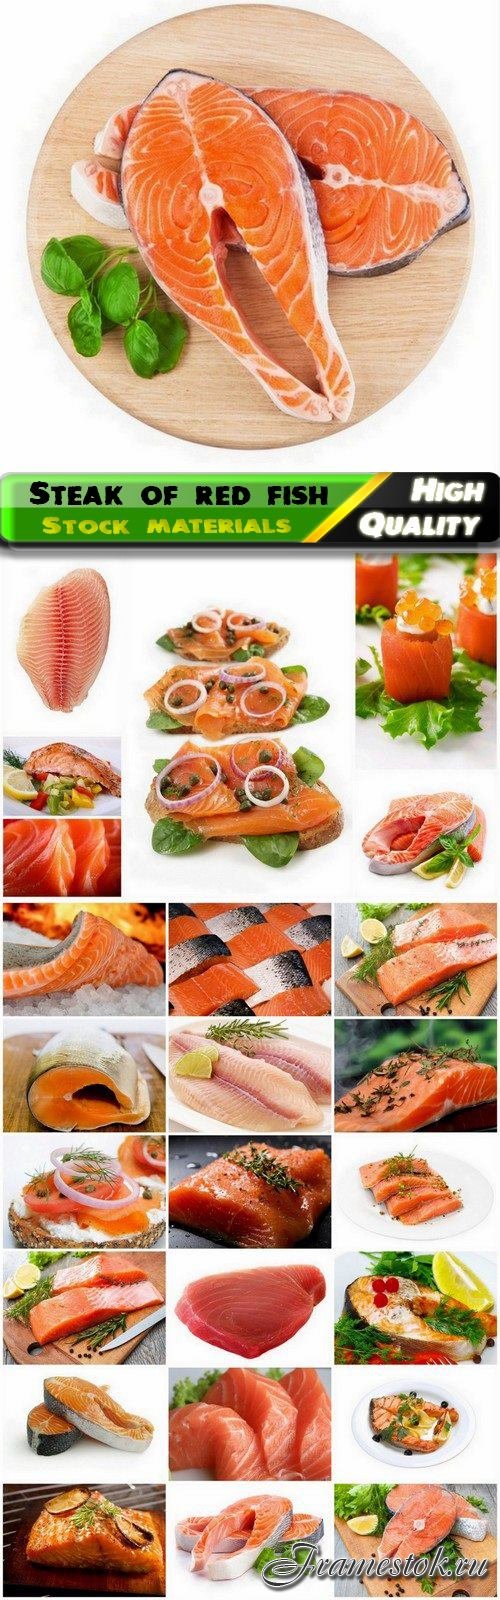 Raw and cooked fillet and steak of red fish - 25 HQ Jpg